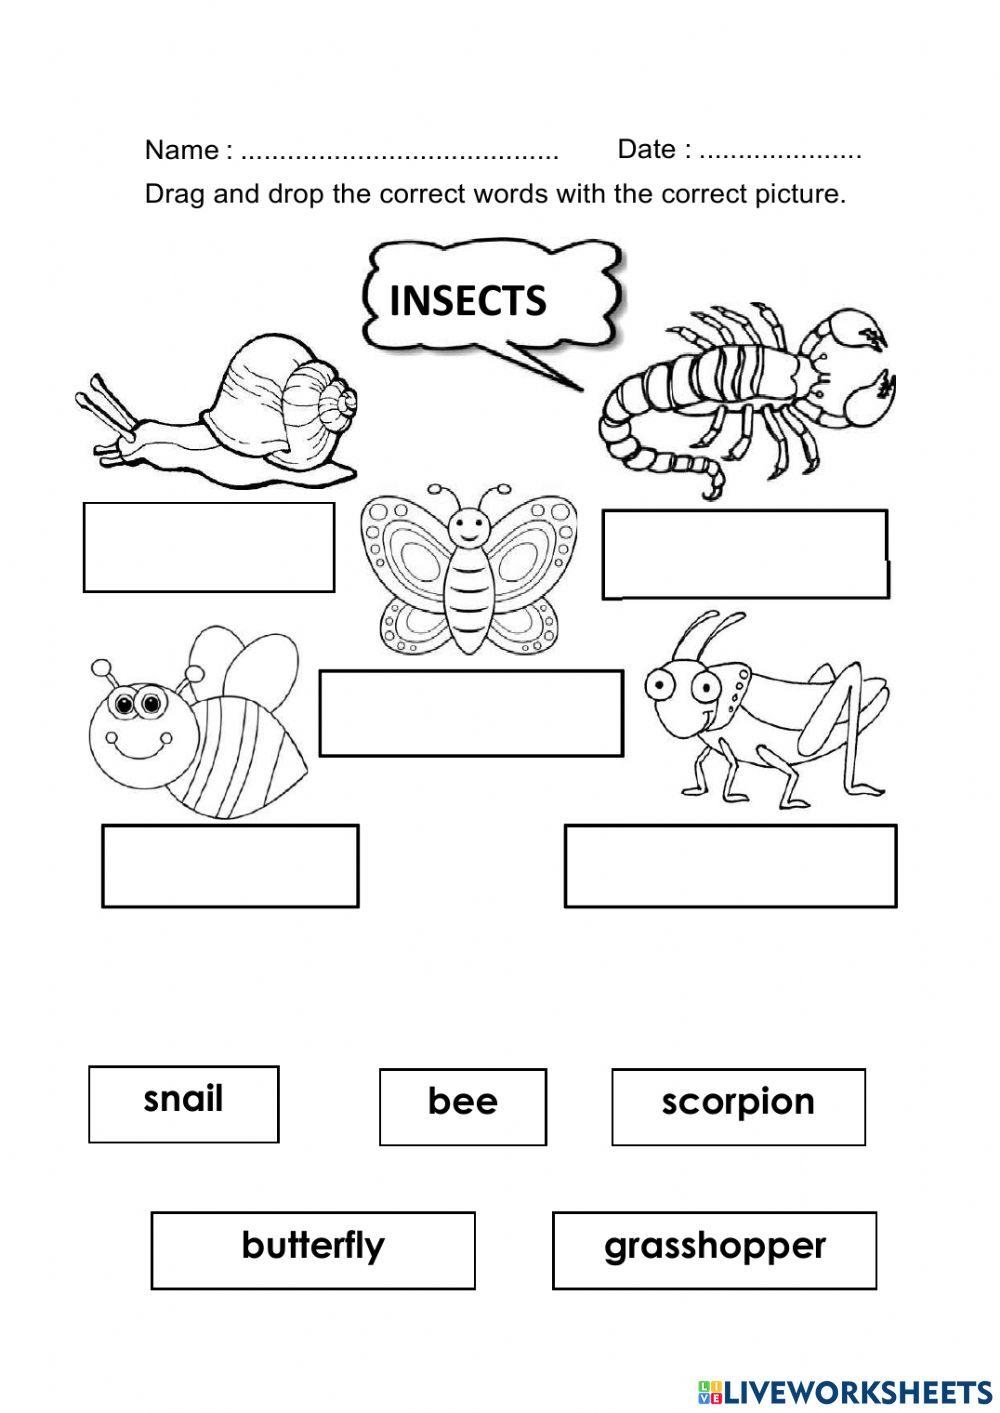 The name of insects